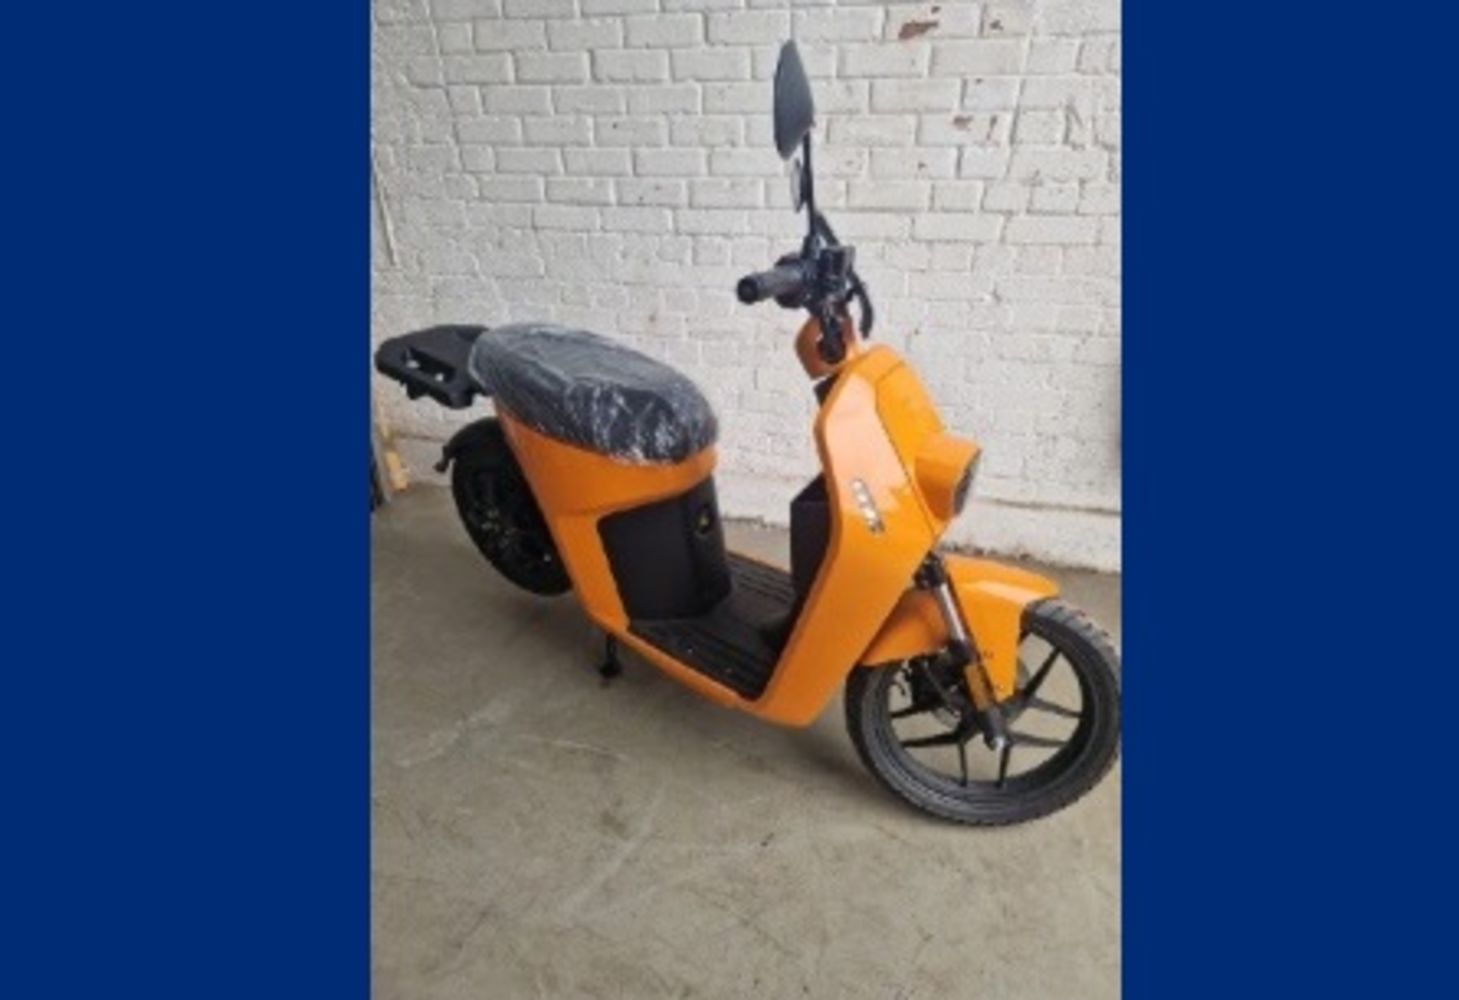 Phase 1 Sale: 28 Boxed, Unused, Unregistered VMOTO VS2 Electric Mopeds